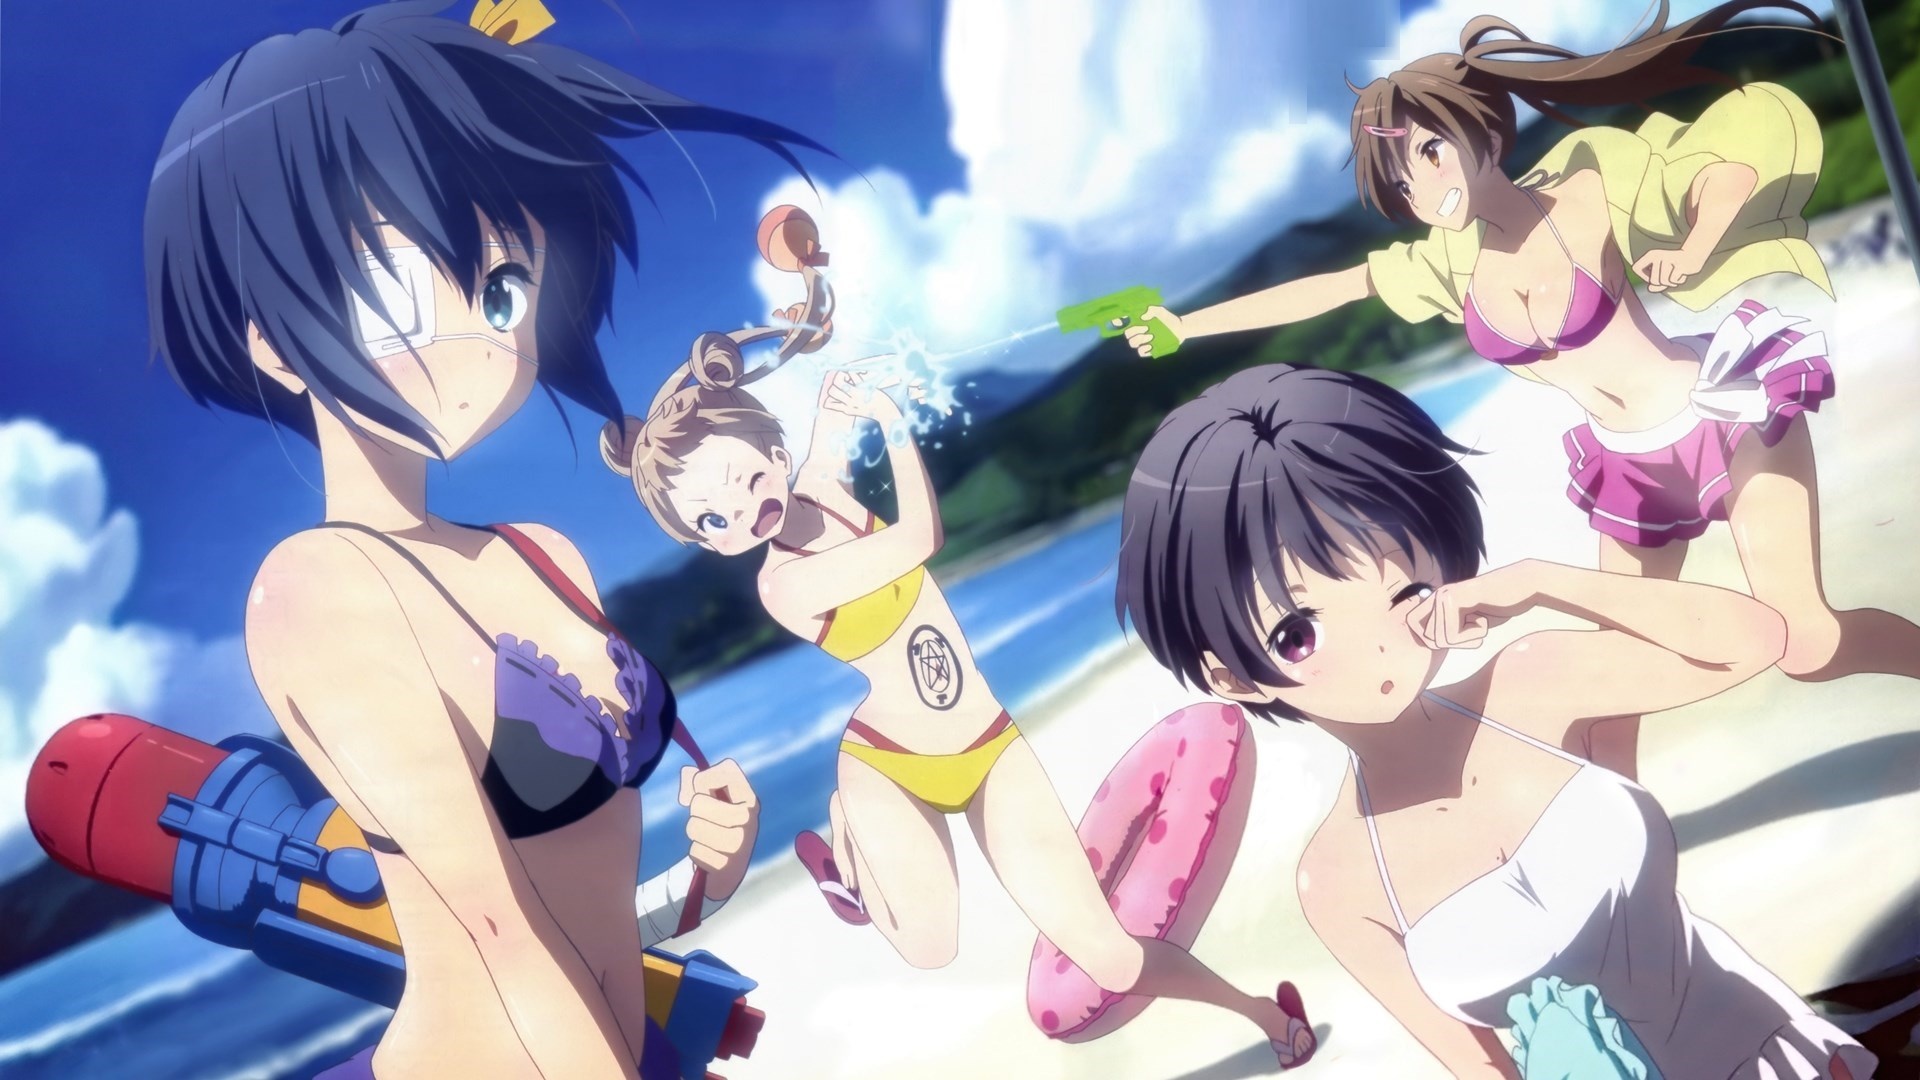 Love, Chunibyo and Other Delusions, Delusional love, Anime couple, Magical charm, 1920x1080 Full HD Desktop